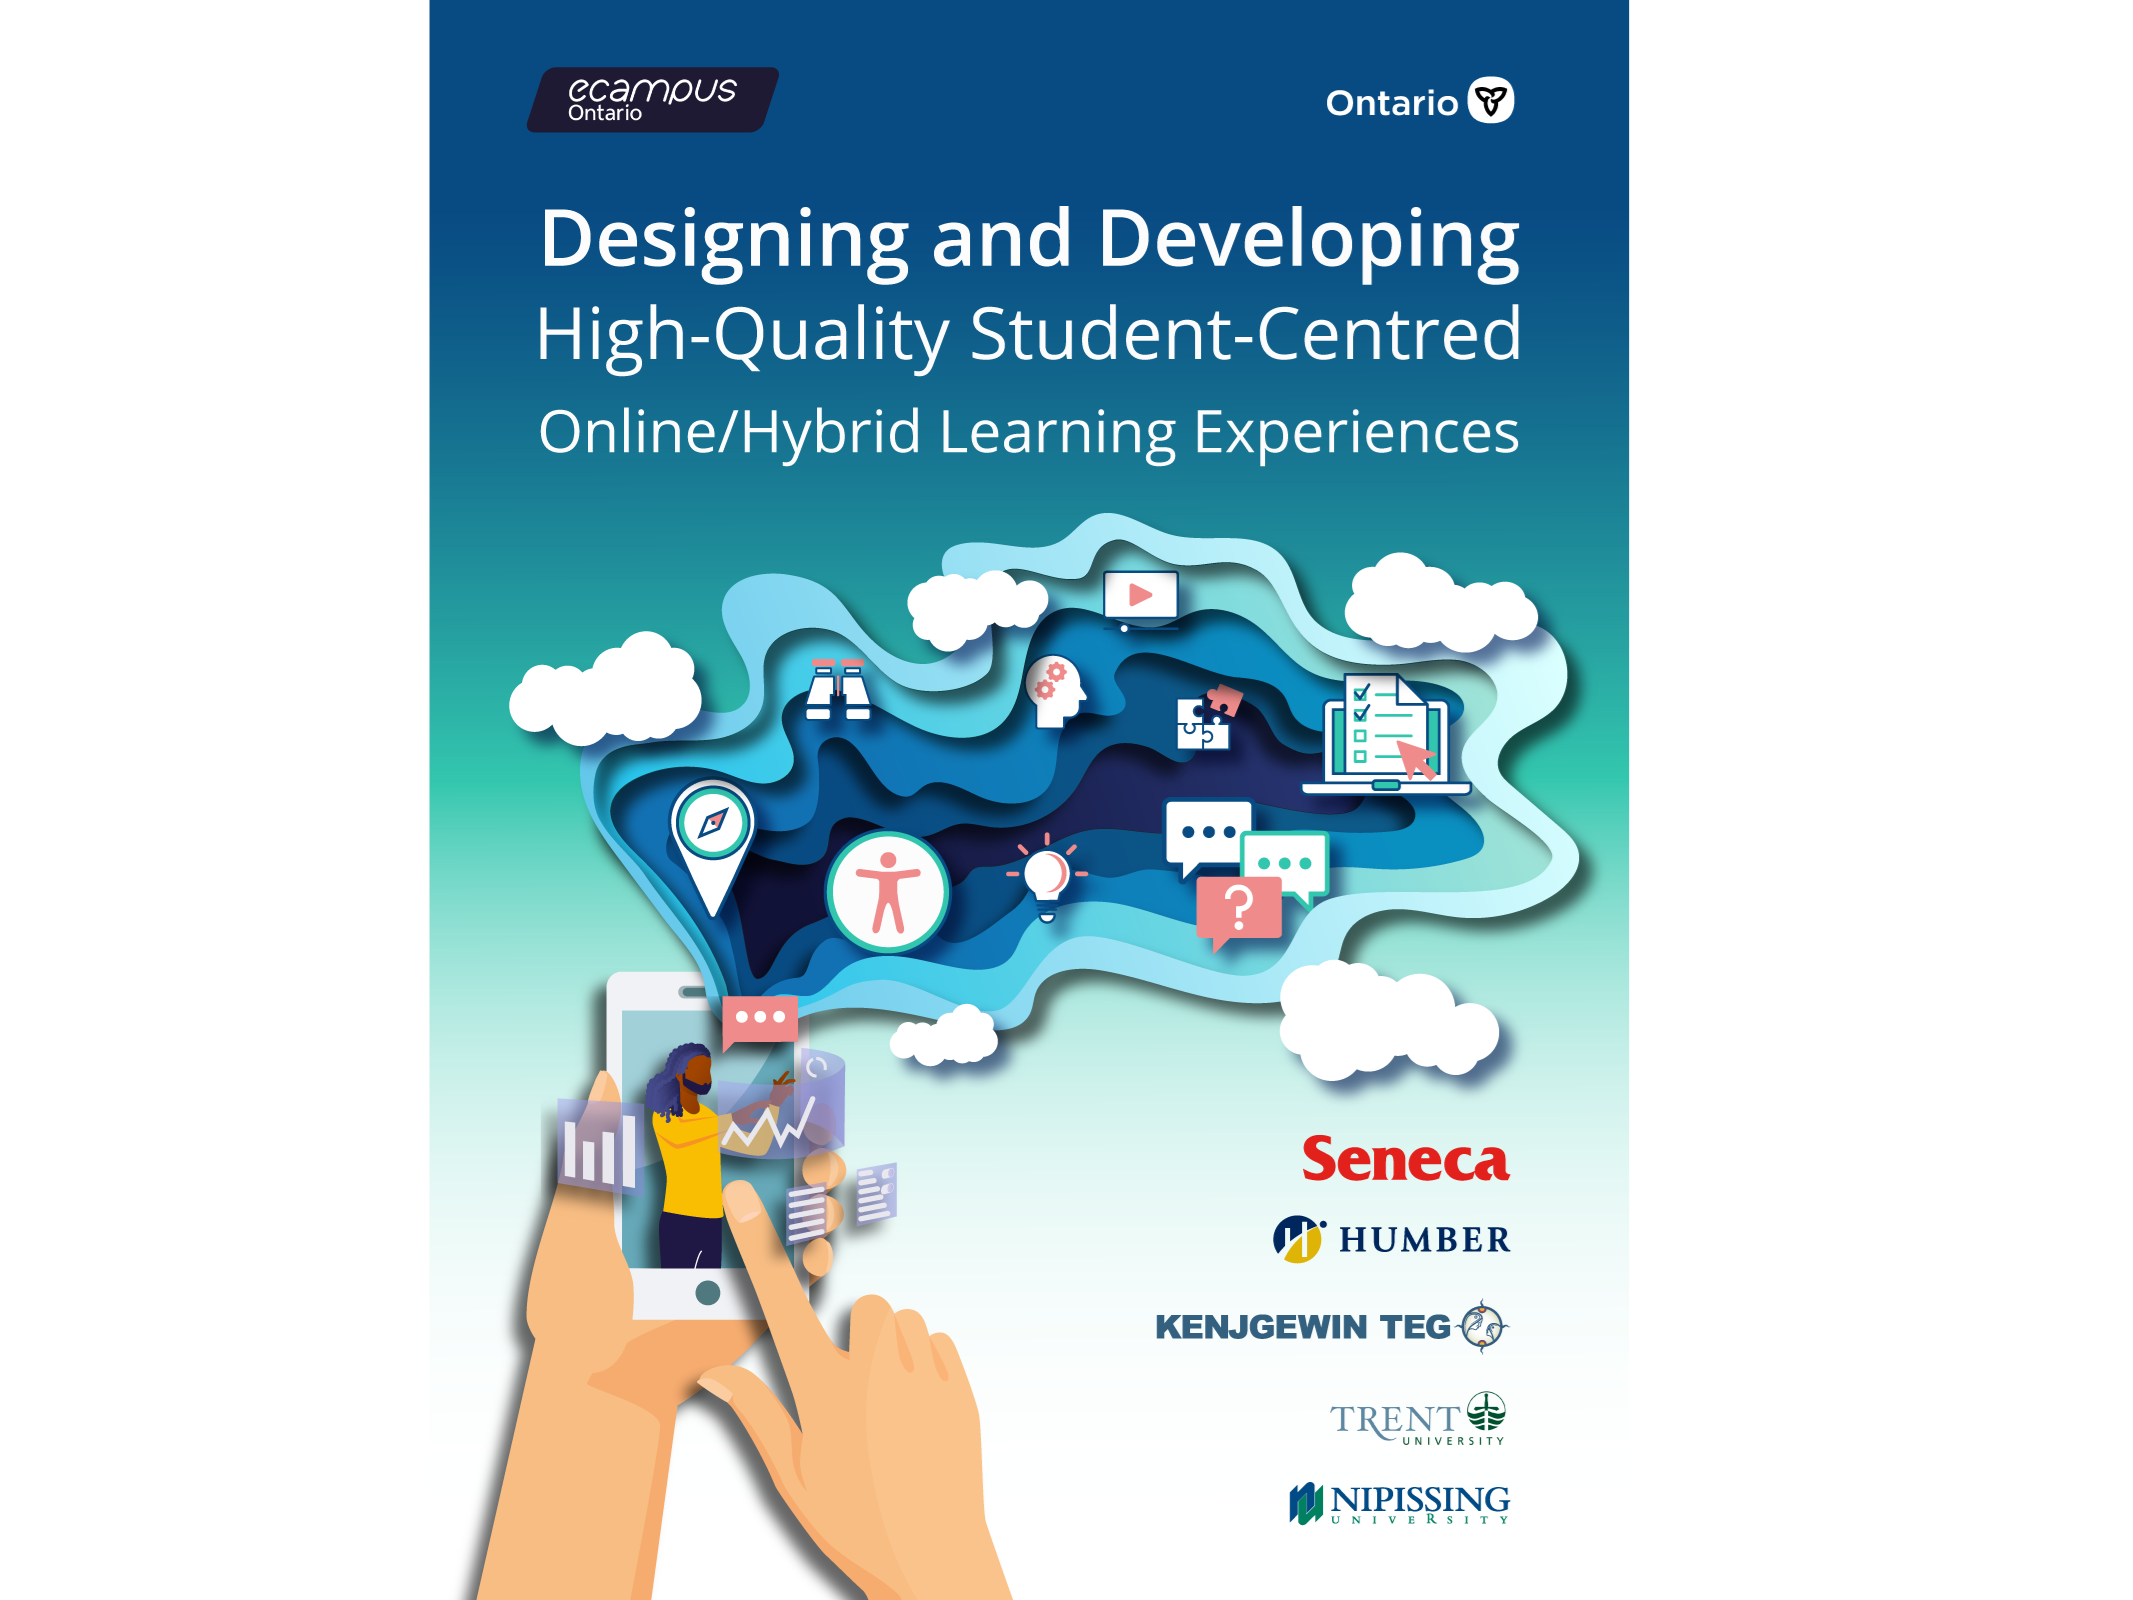 Designing and Developing High Quality Student-Centred Online/Hybrid Learning Experiences